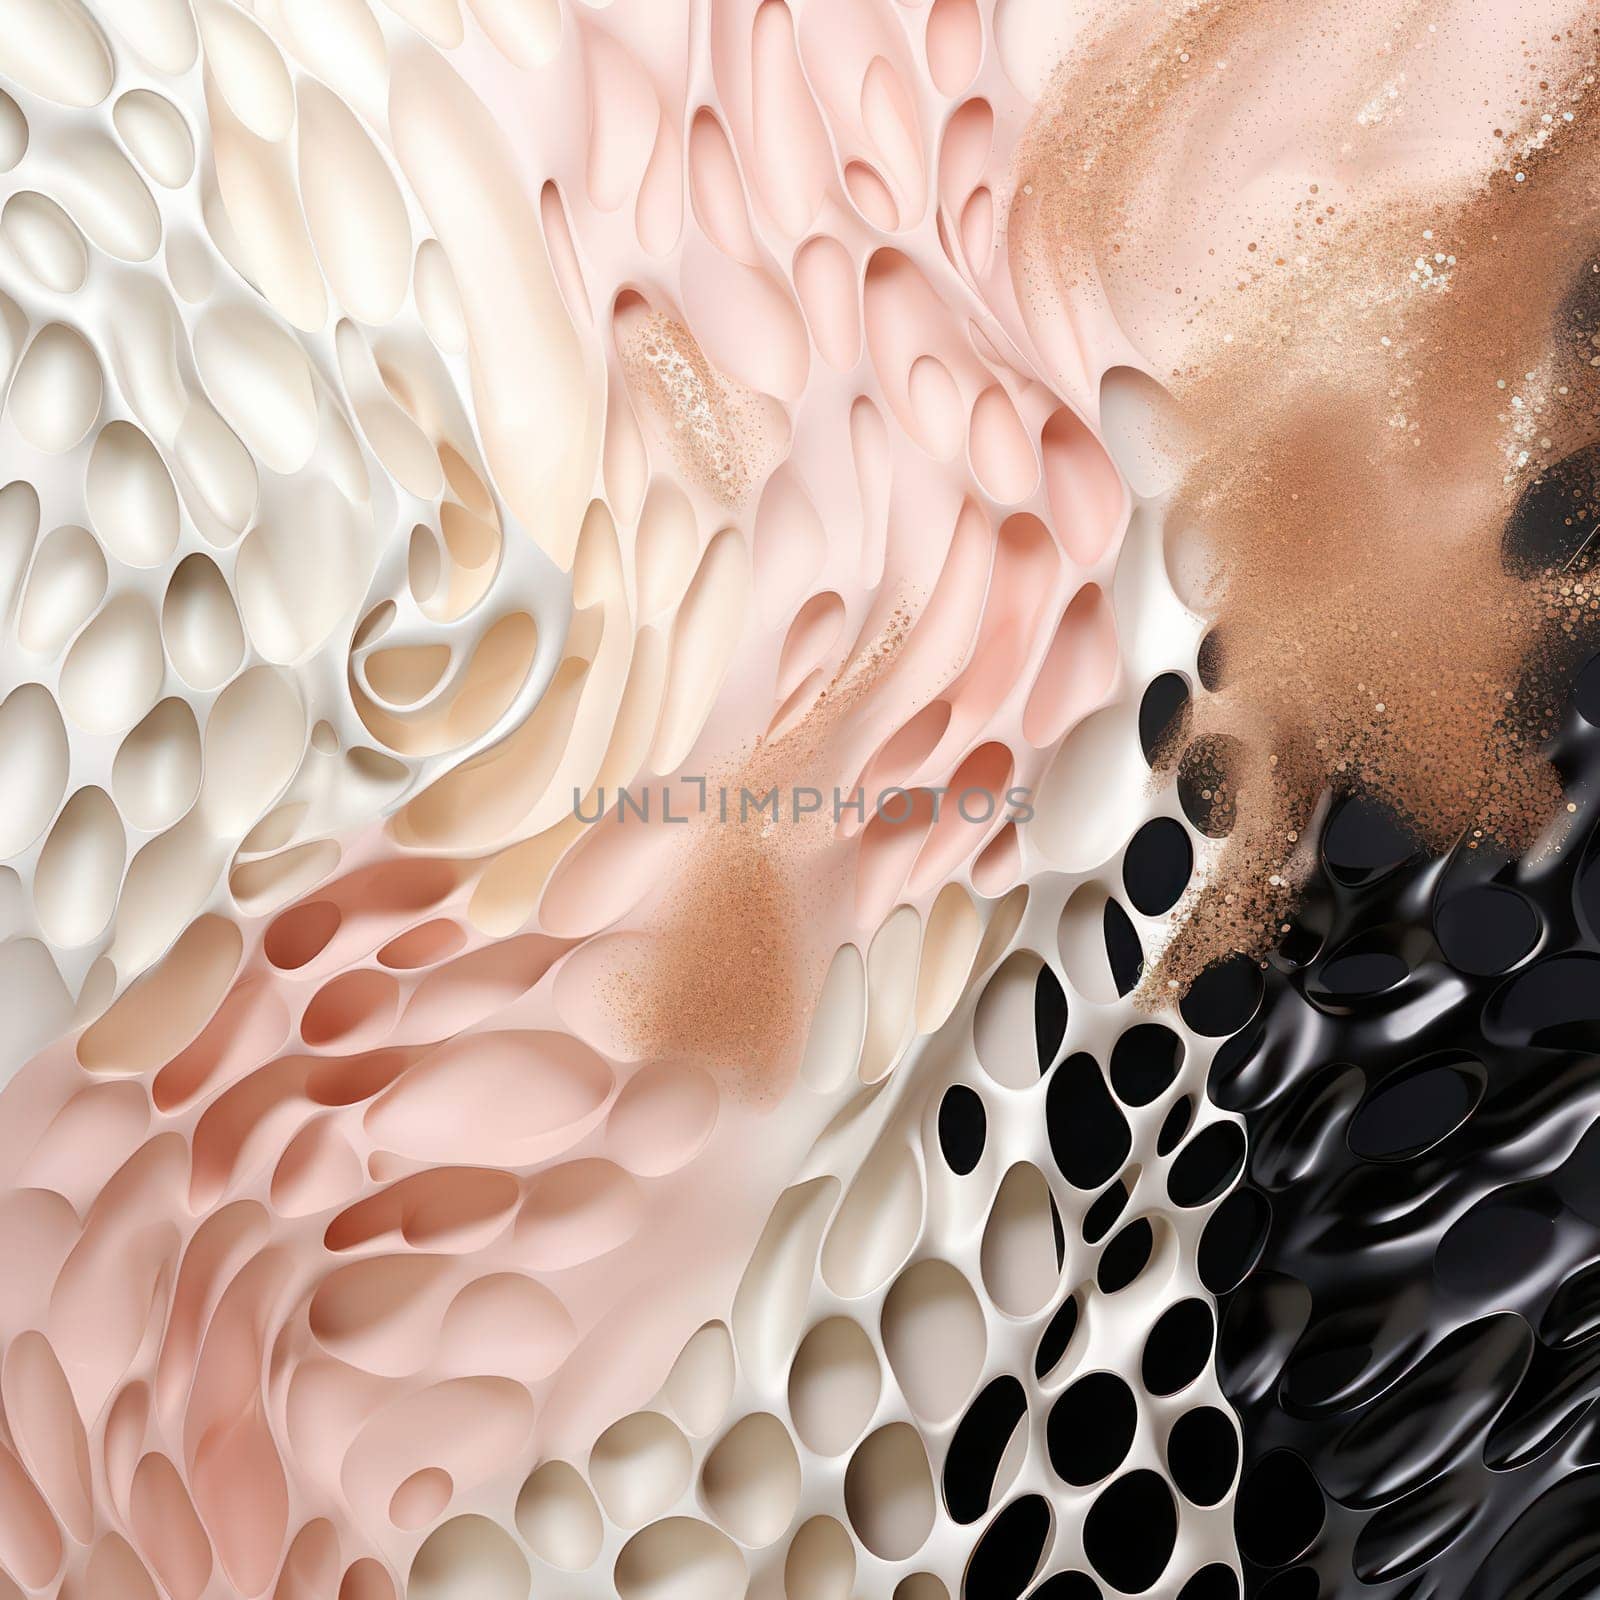 Abstract Textured Design: A Modern Fashion Illustration of Pink Fluid Paint on a White Background